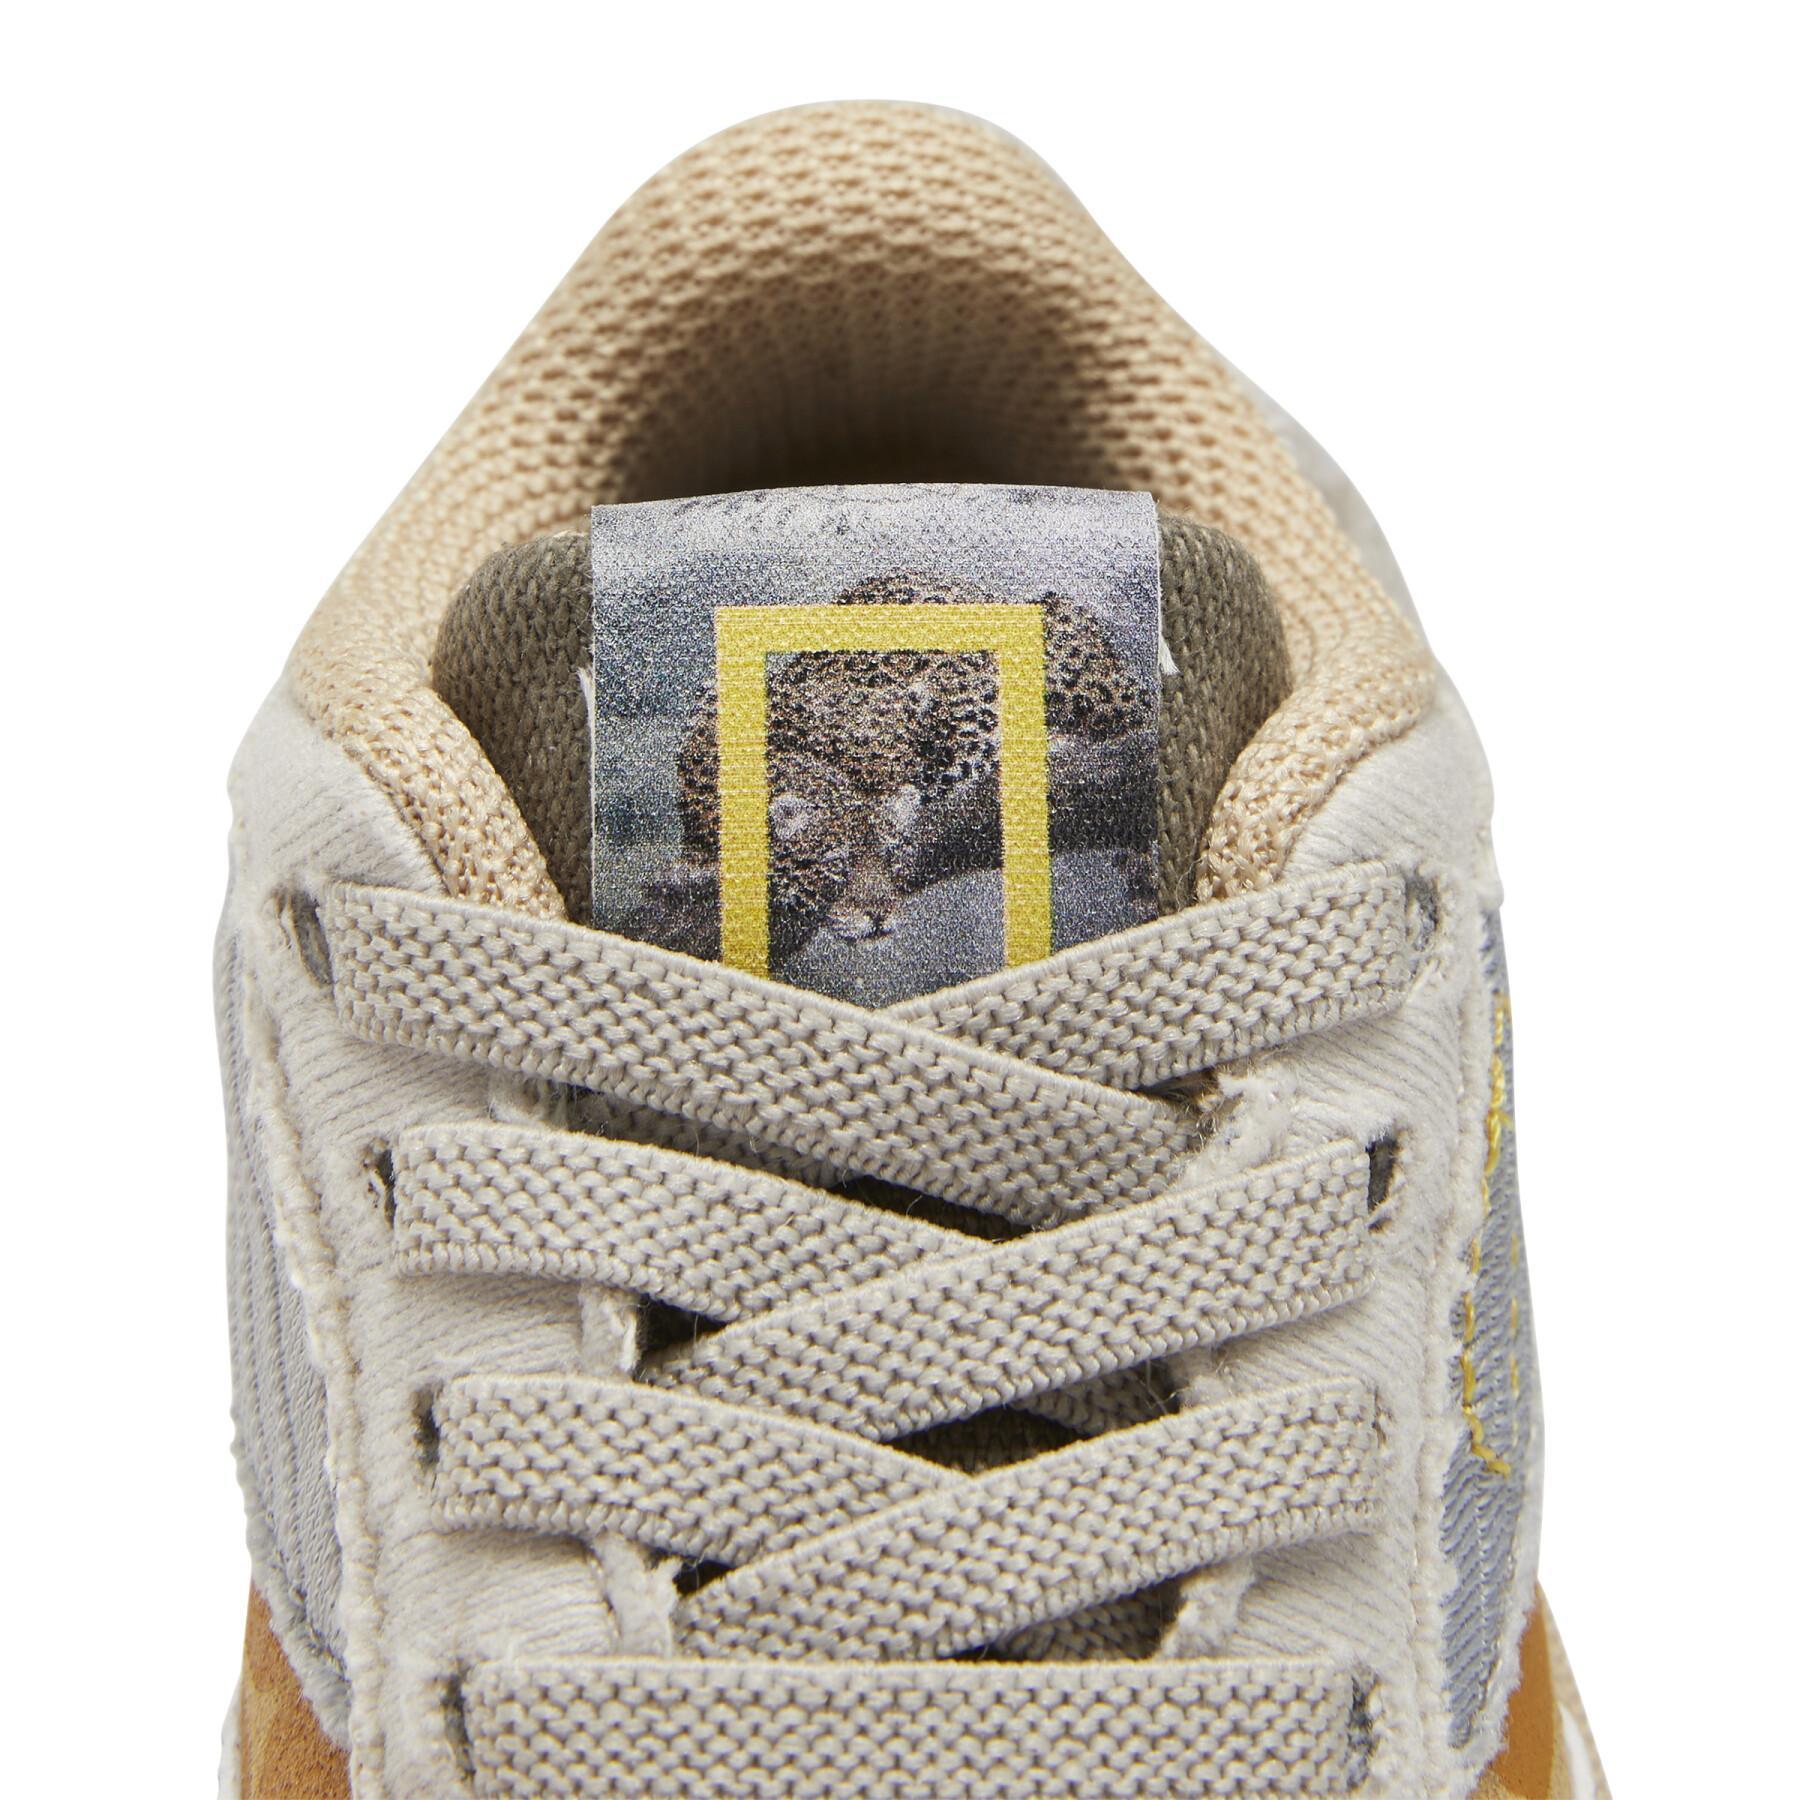 Children's sneakers Reebok National Geographic Club C